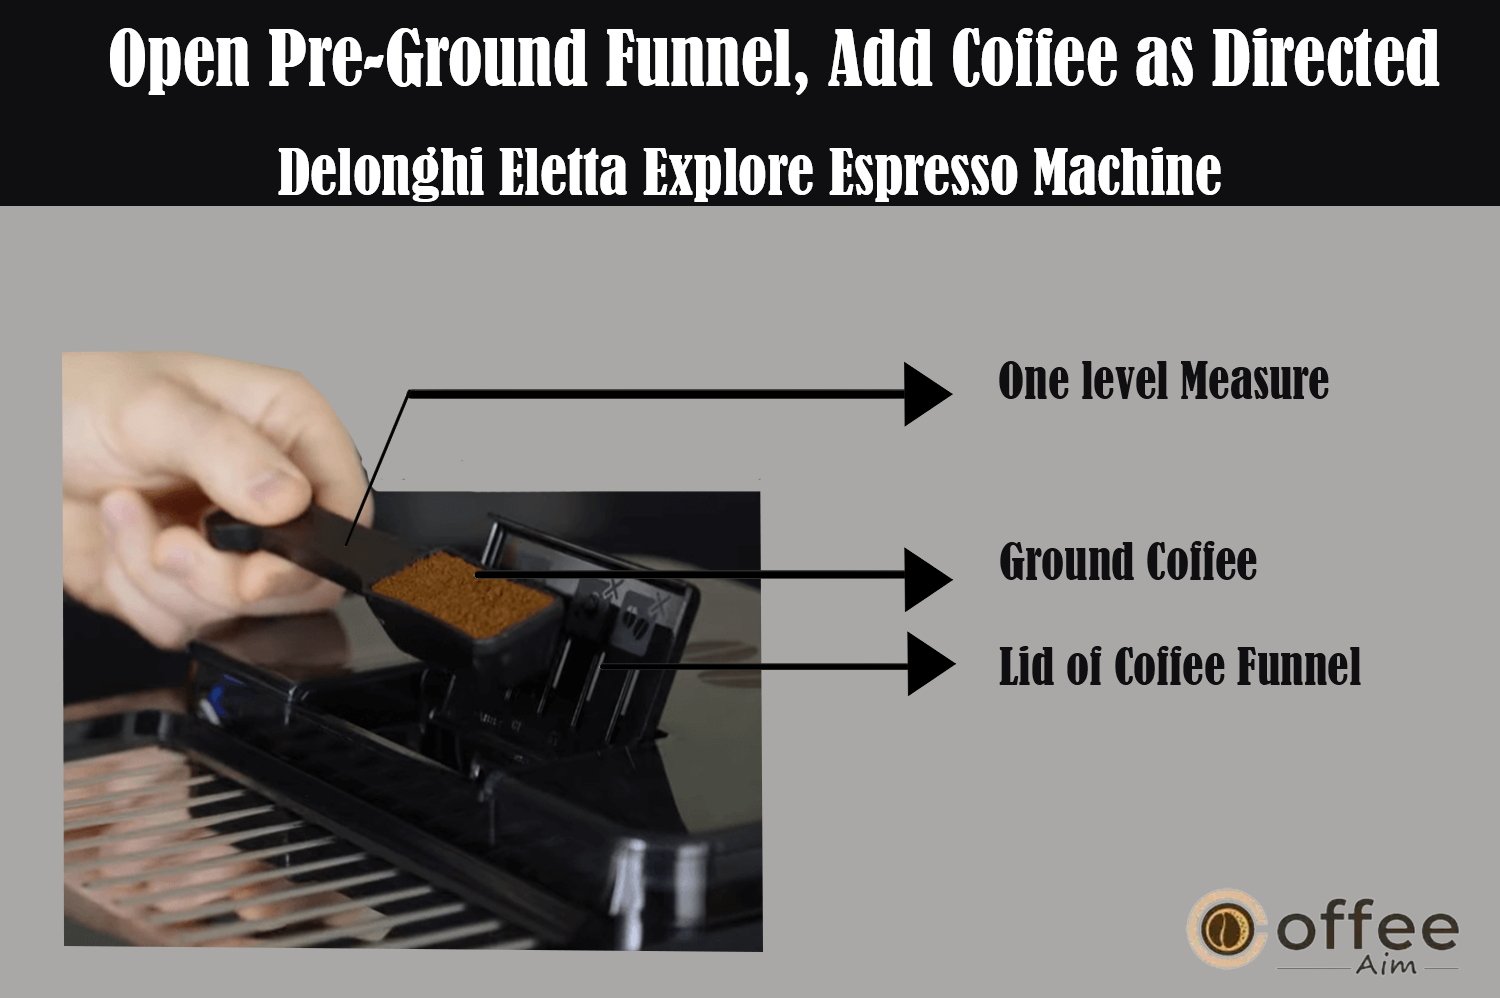 This image illustrates the process of lifting the lid of the pre-ground coffee funnel and adding one level measure of pre-ground coffee using the De'Longhi Eletta Explore Espresso Machine, as detailed in the article 'How to Use the De'Longhi Eletta Explore Espresso Machine'.